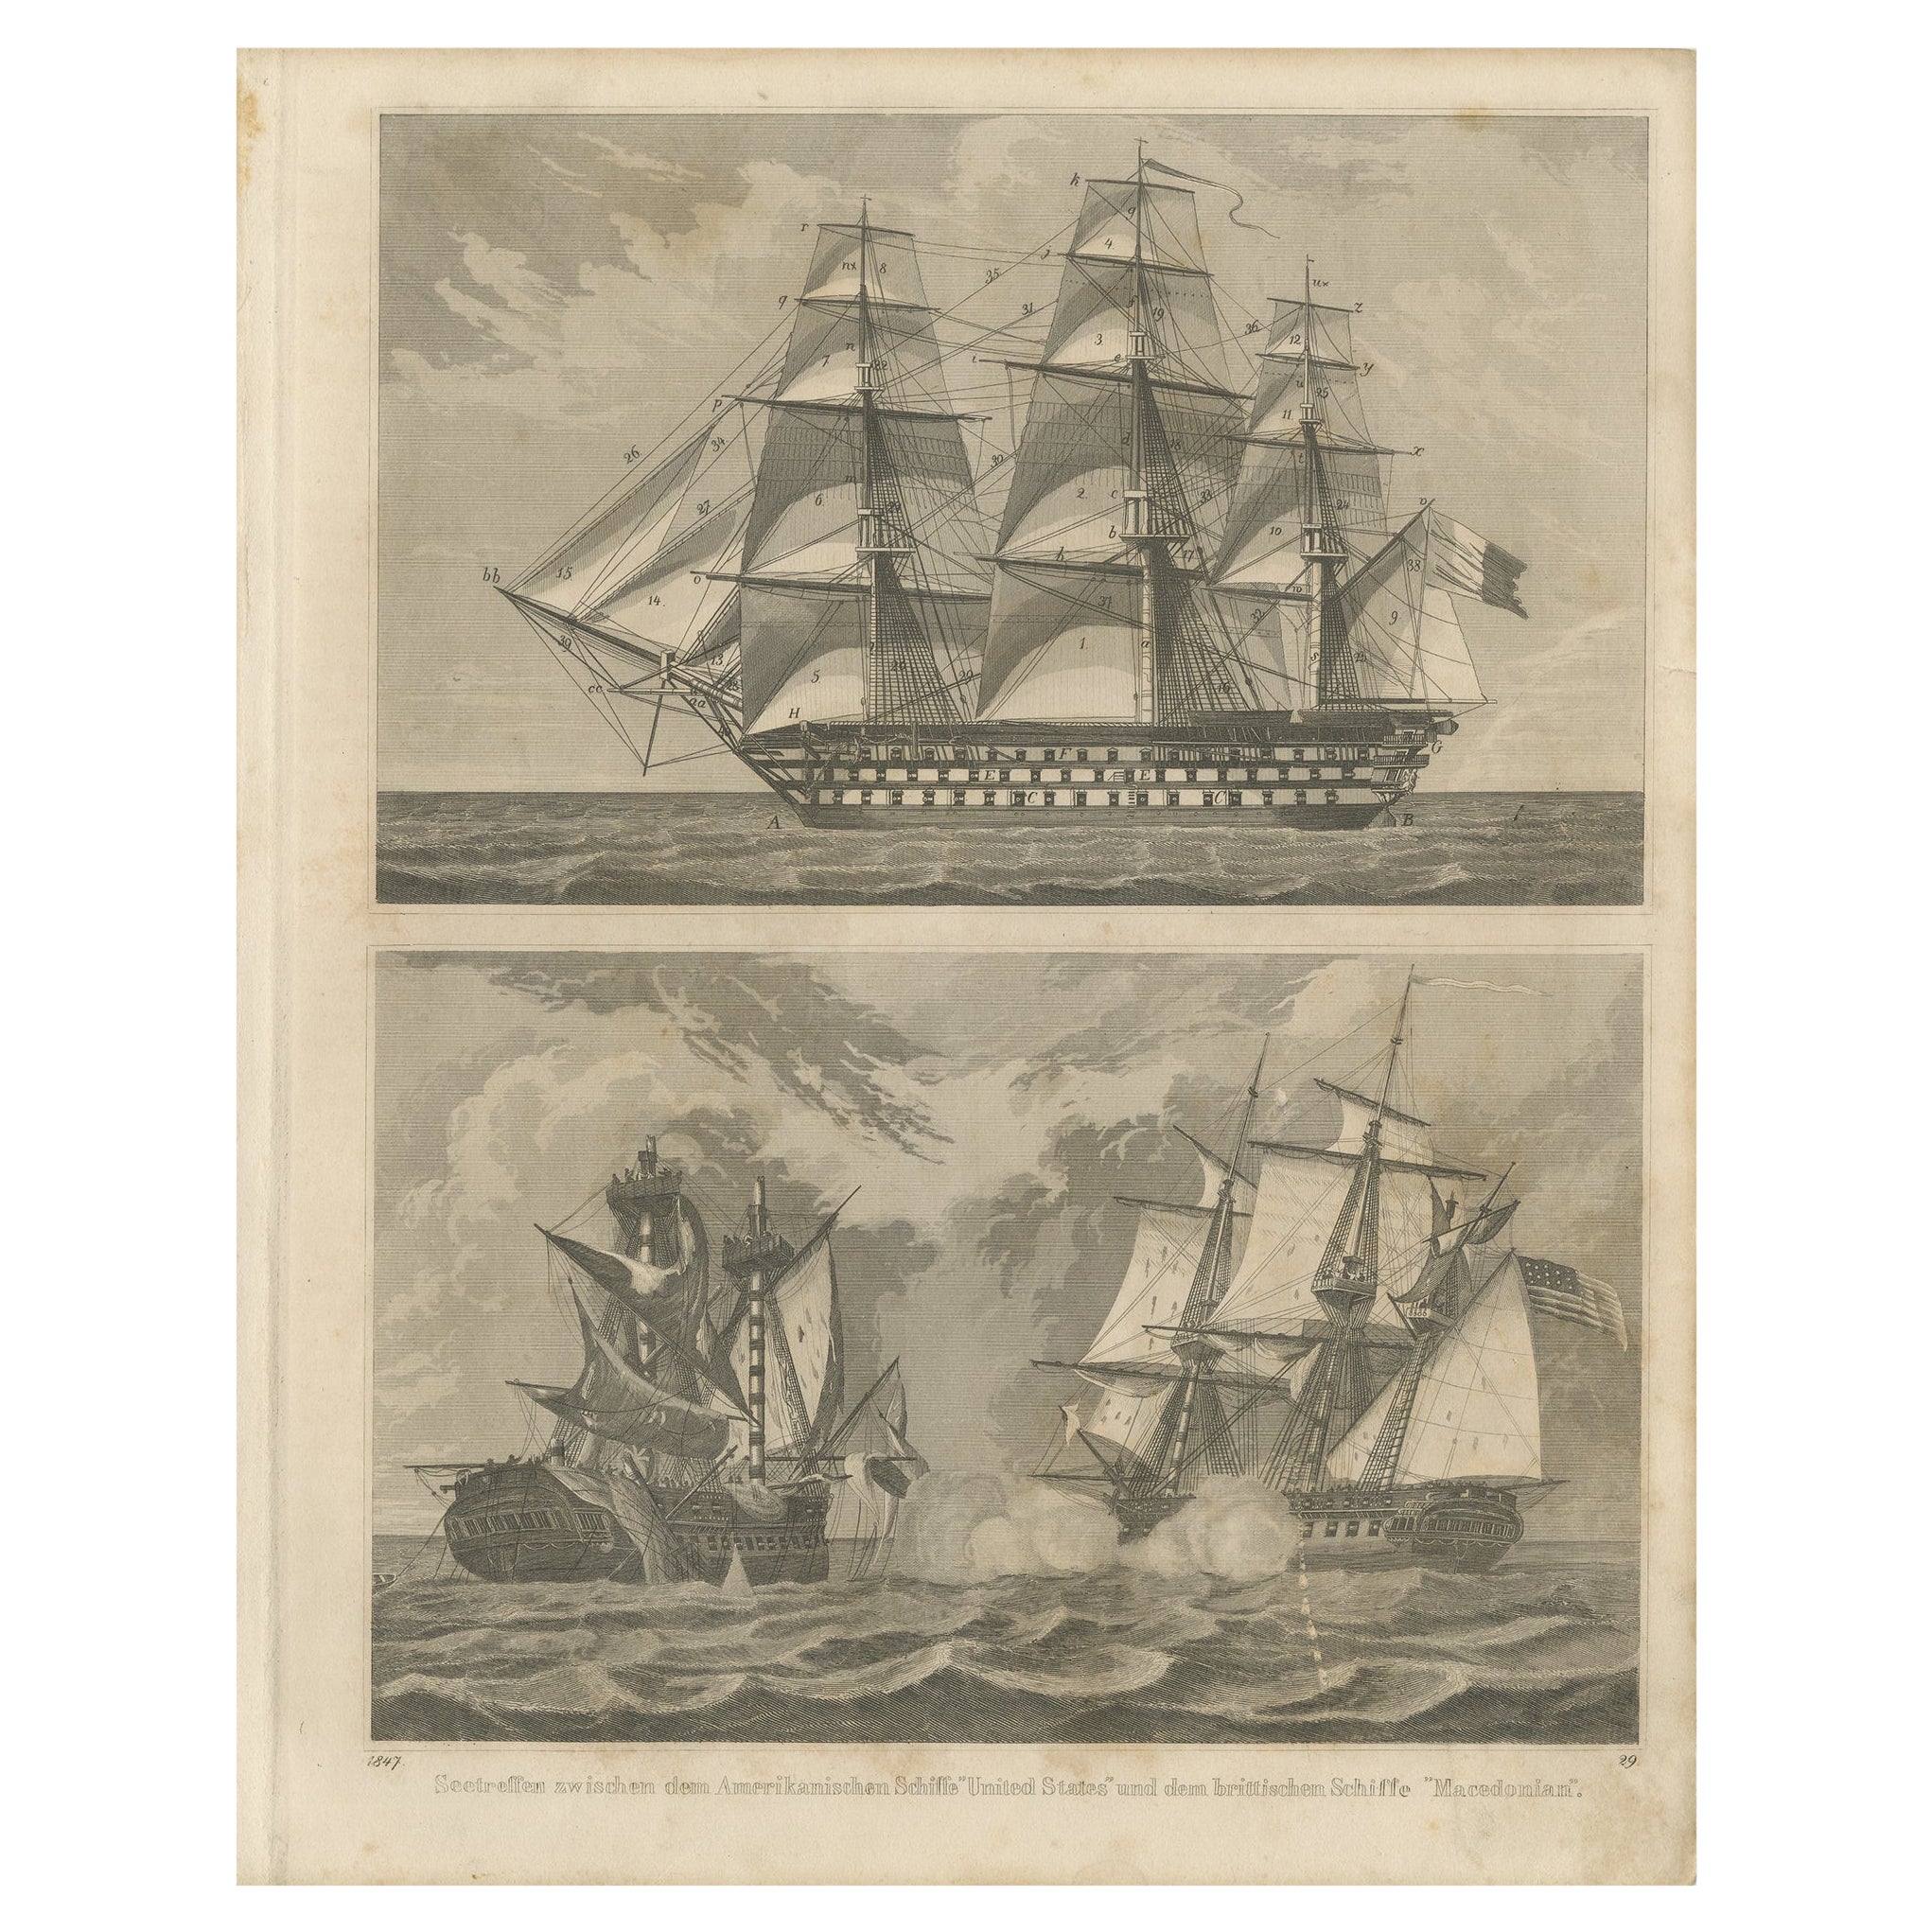 Antique Sea Battle Print Between an American and a British Ship, 1847